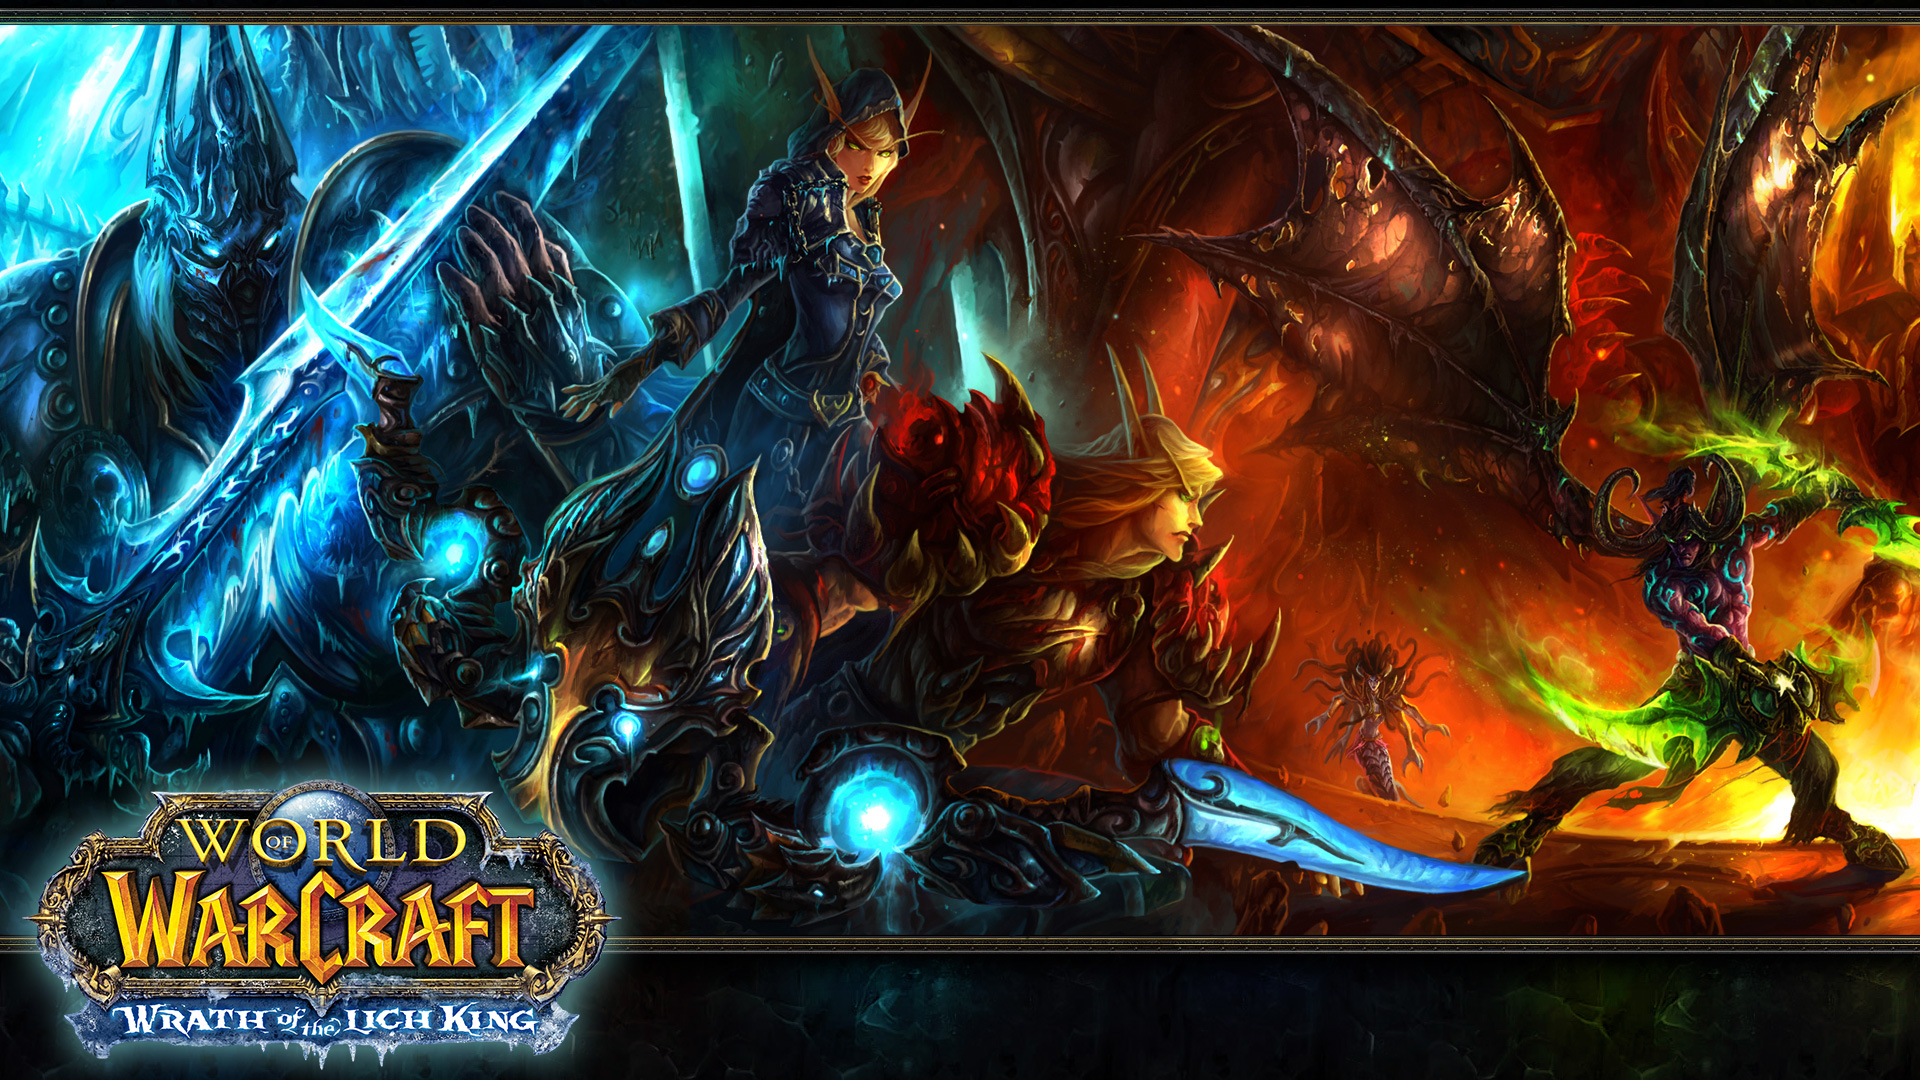 World of Warcraft Wrath of the Lich King wallpaper   135766